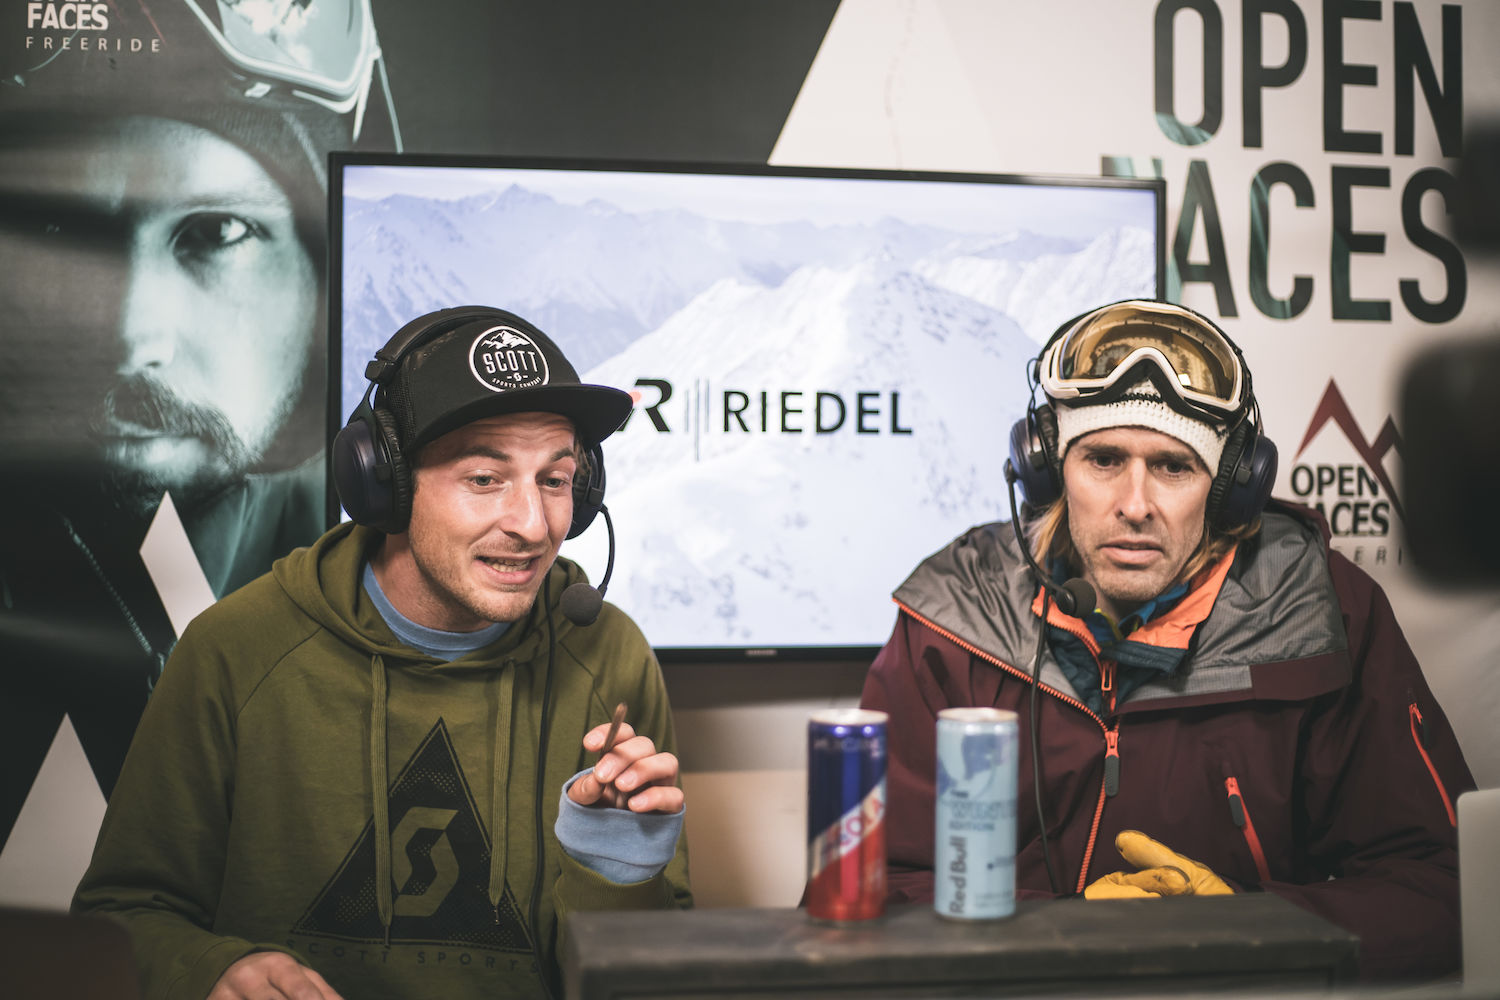 Christian Gaderer and Flo Orley commentating the Open Faces Freeride livestream